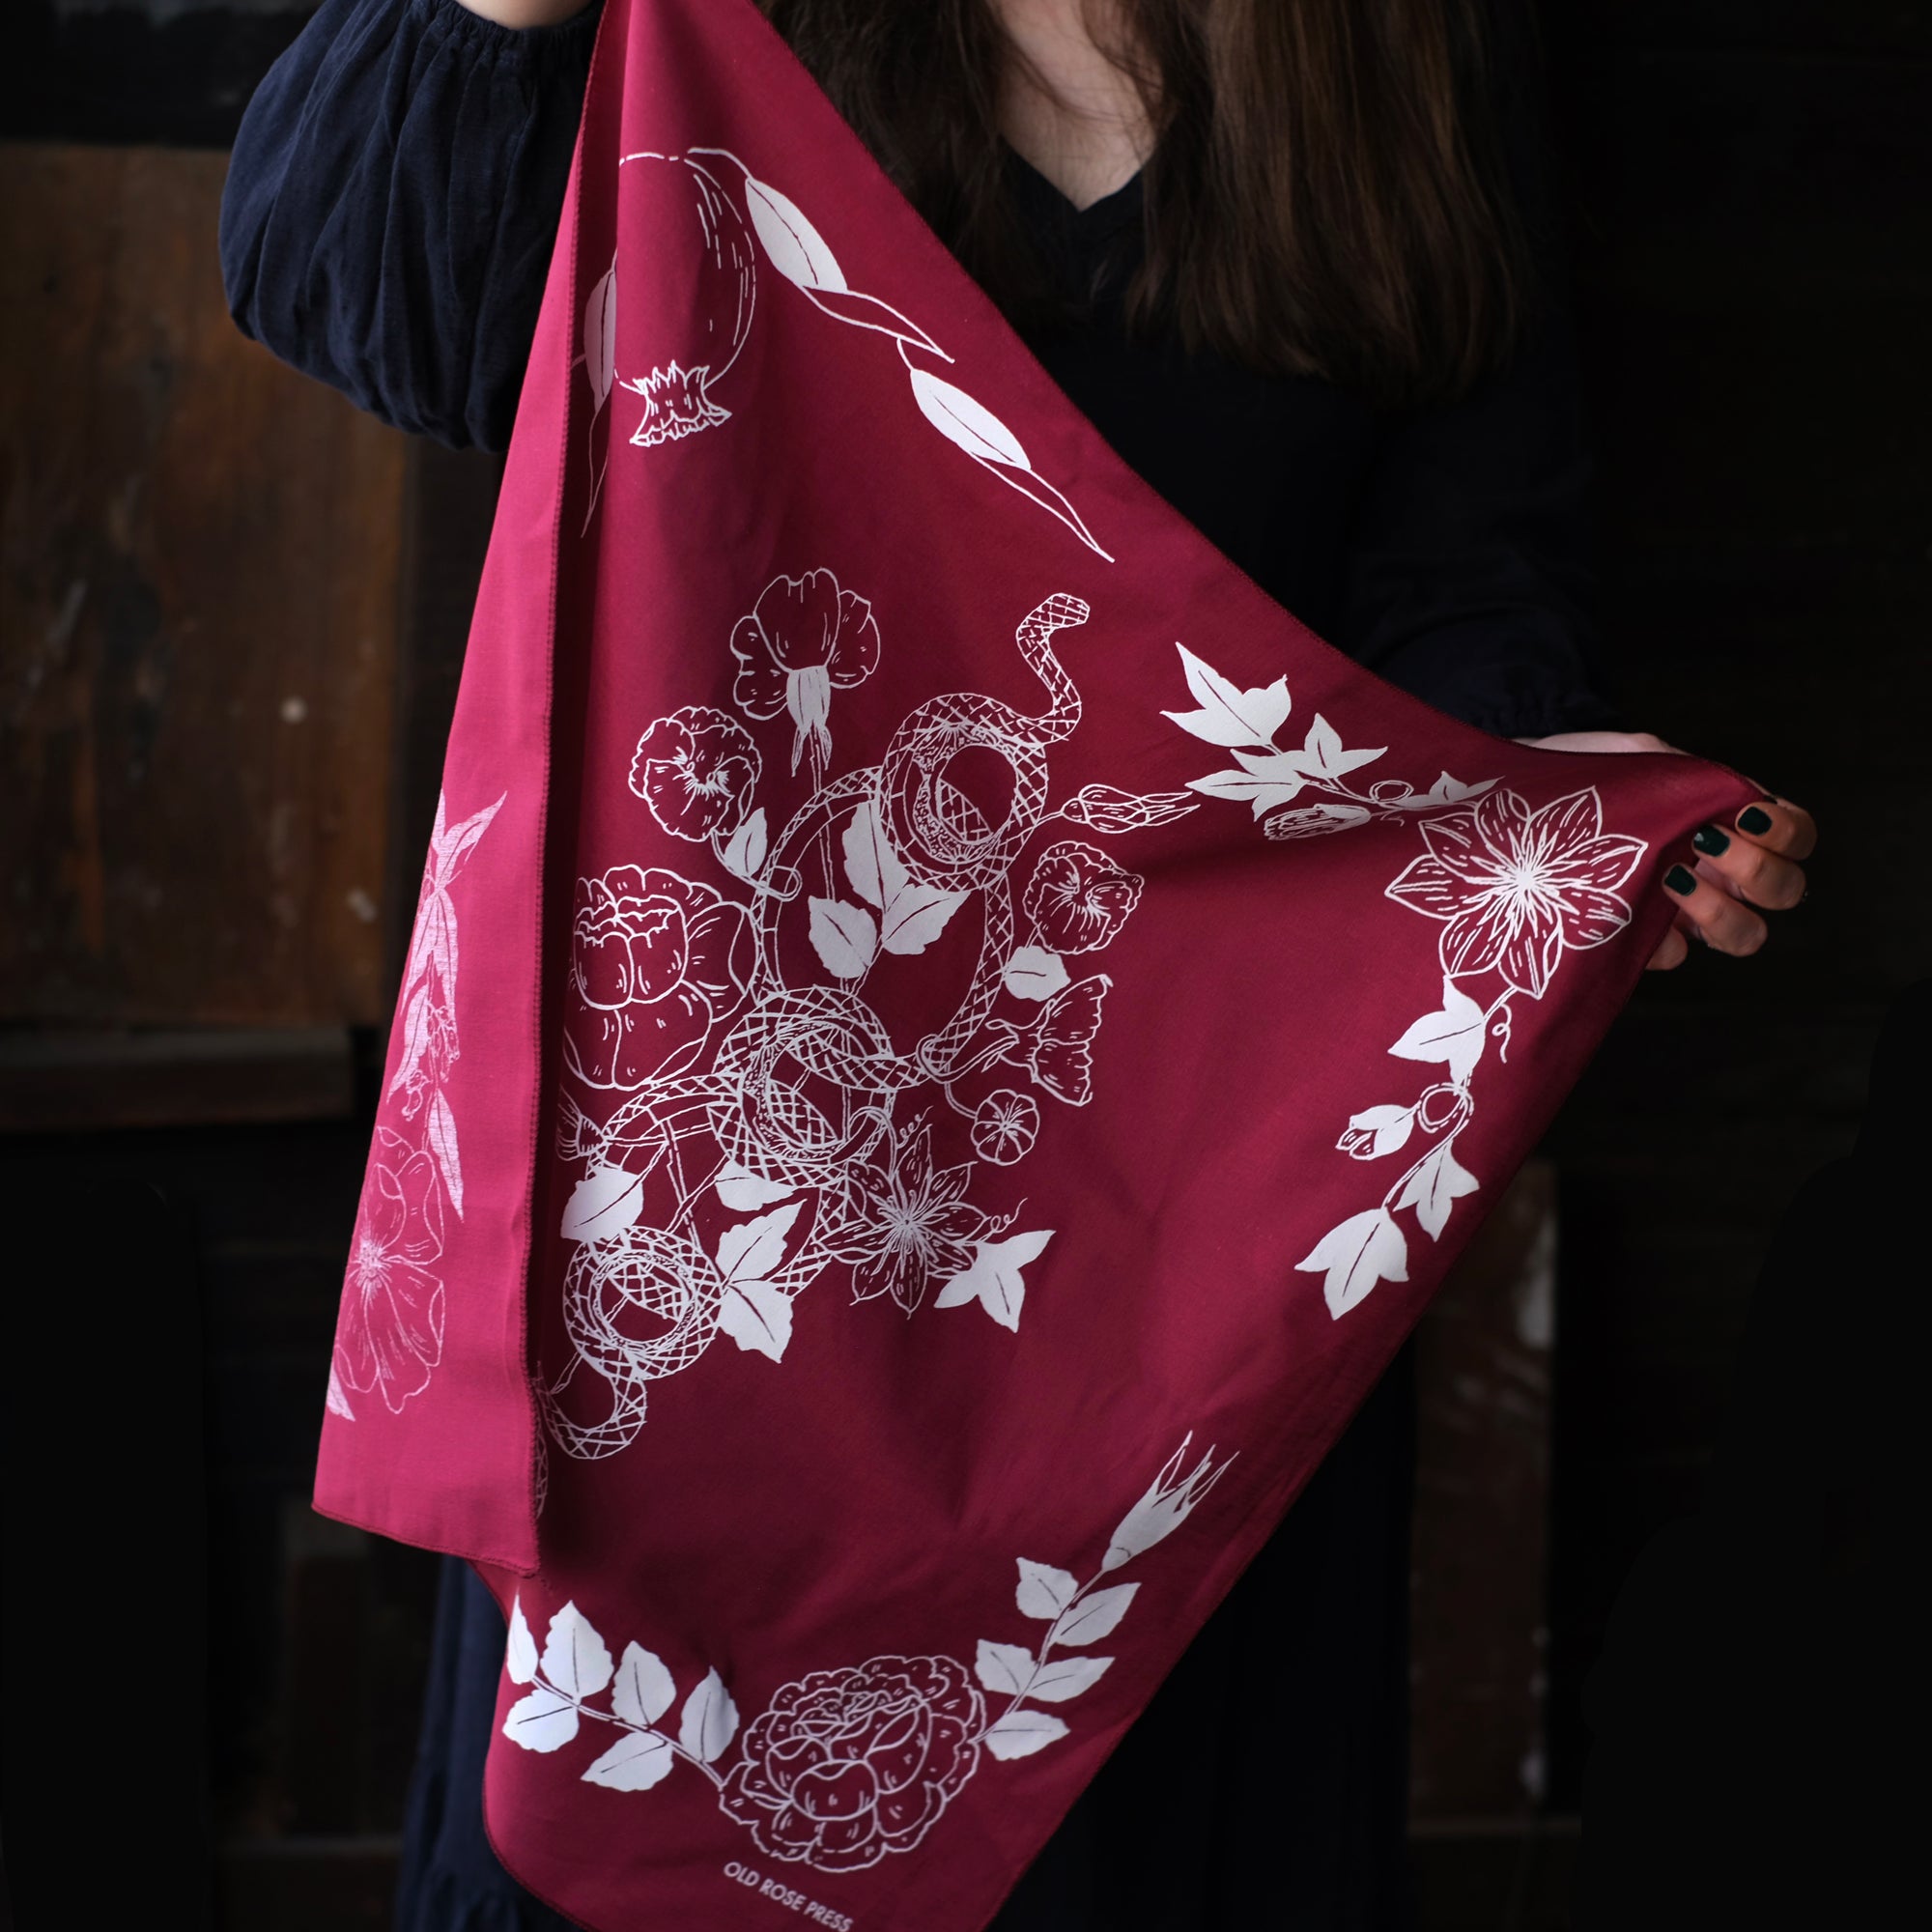 Serpent Garden Bandana reflects the botanicals throughout the four seasons, alongside a plant adorned snake. Artisan printed and illustrated by hand, to be used as an accessory or altar cloth. 